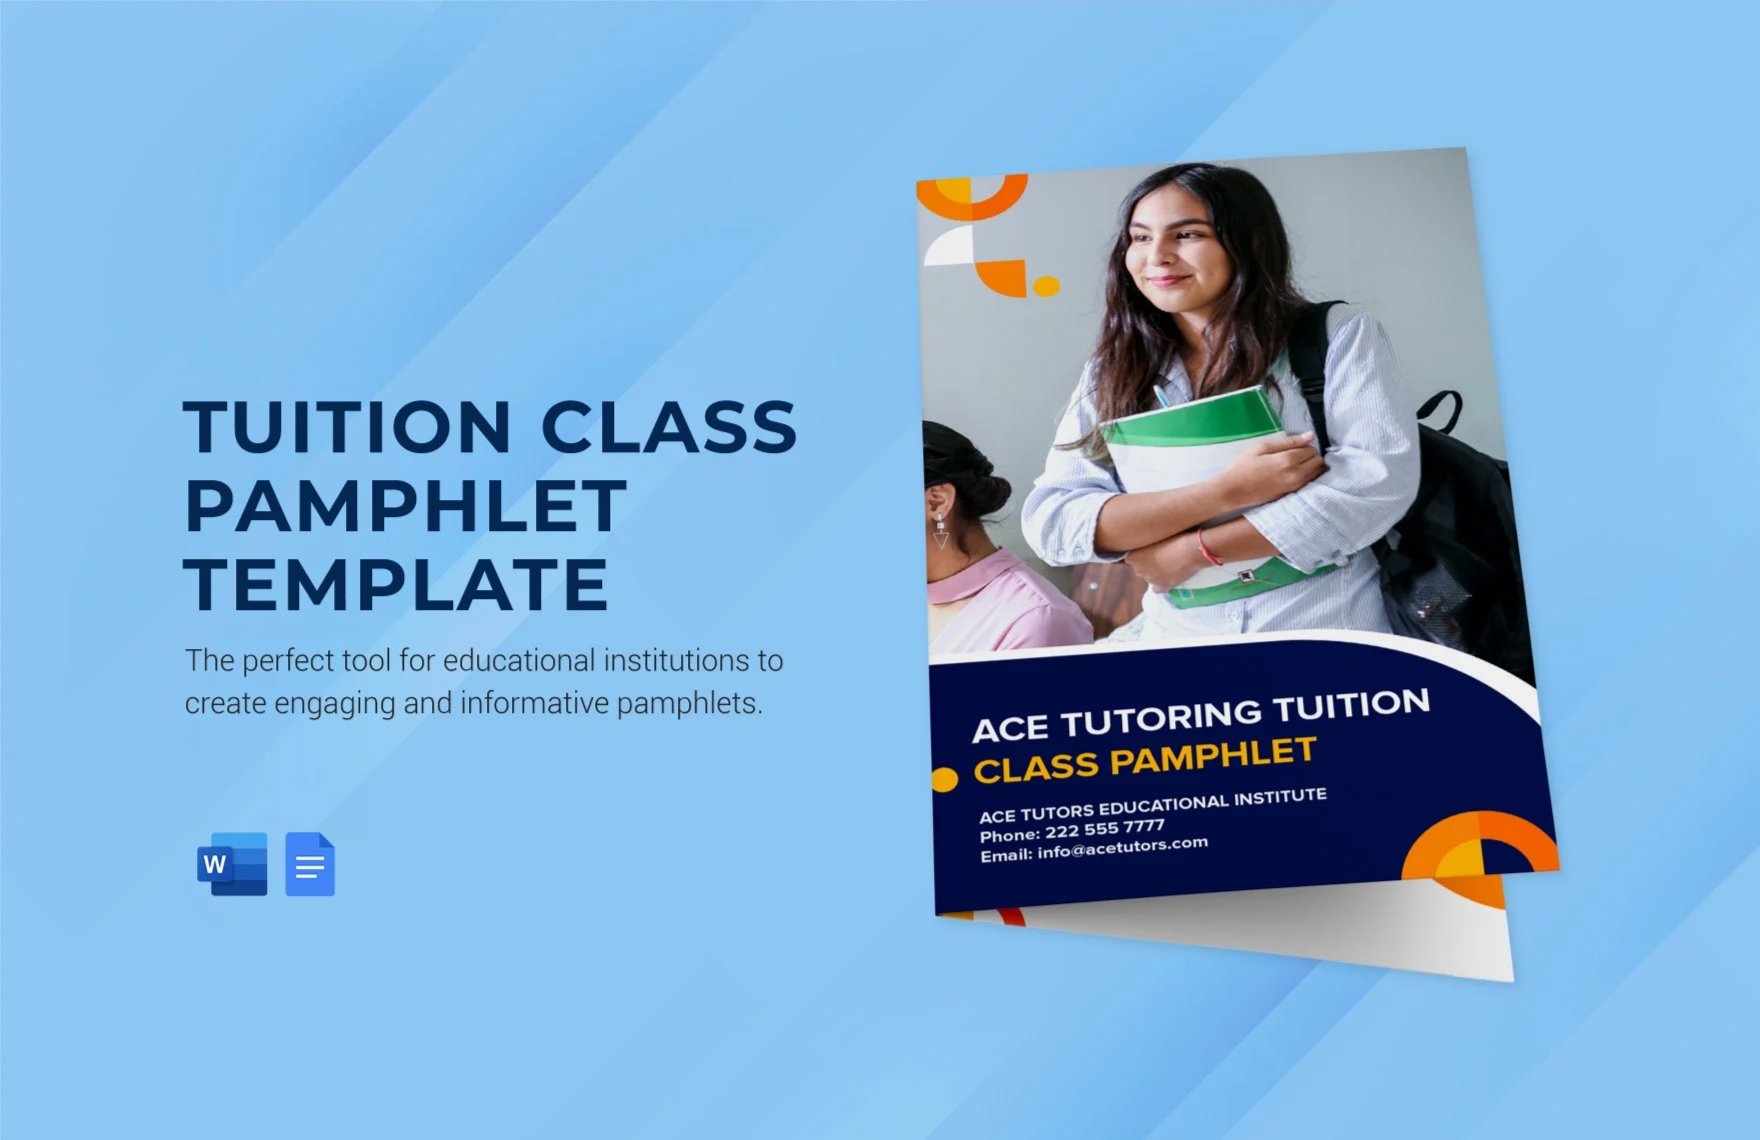 Tuition Class Pamphlet Template in Word, Google Docs